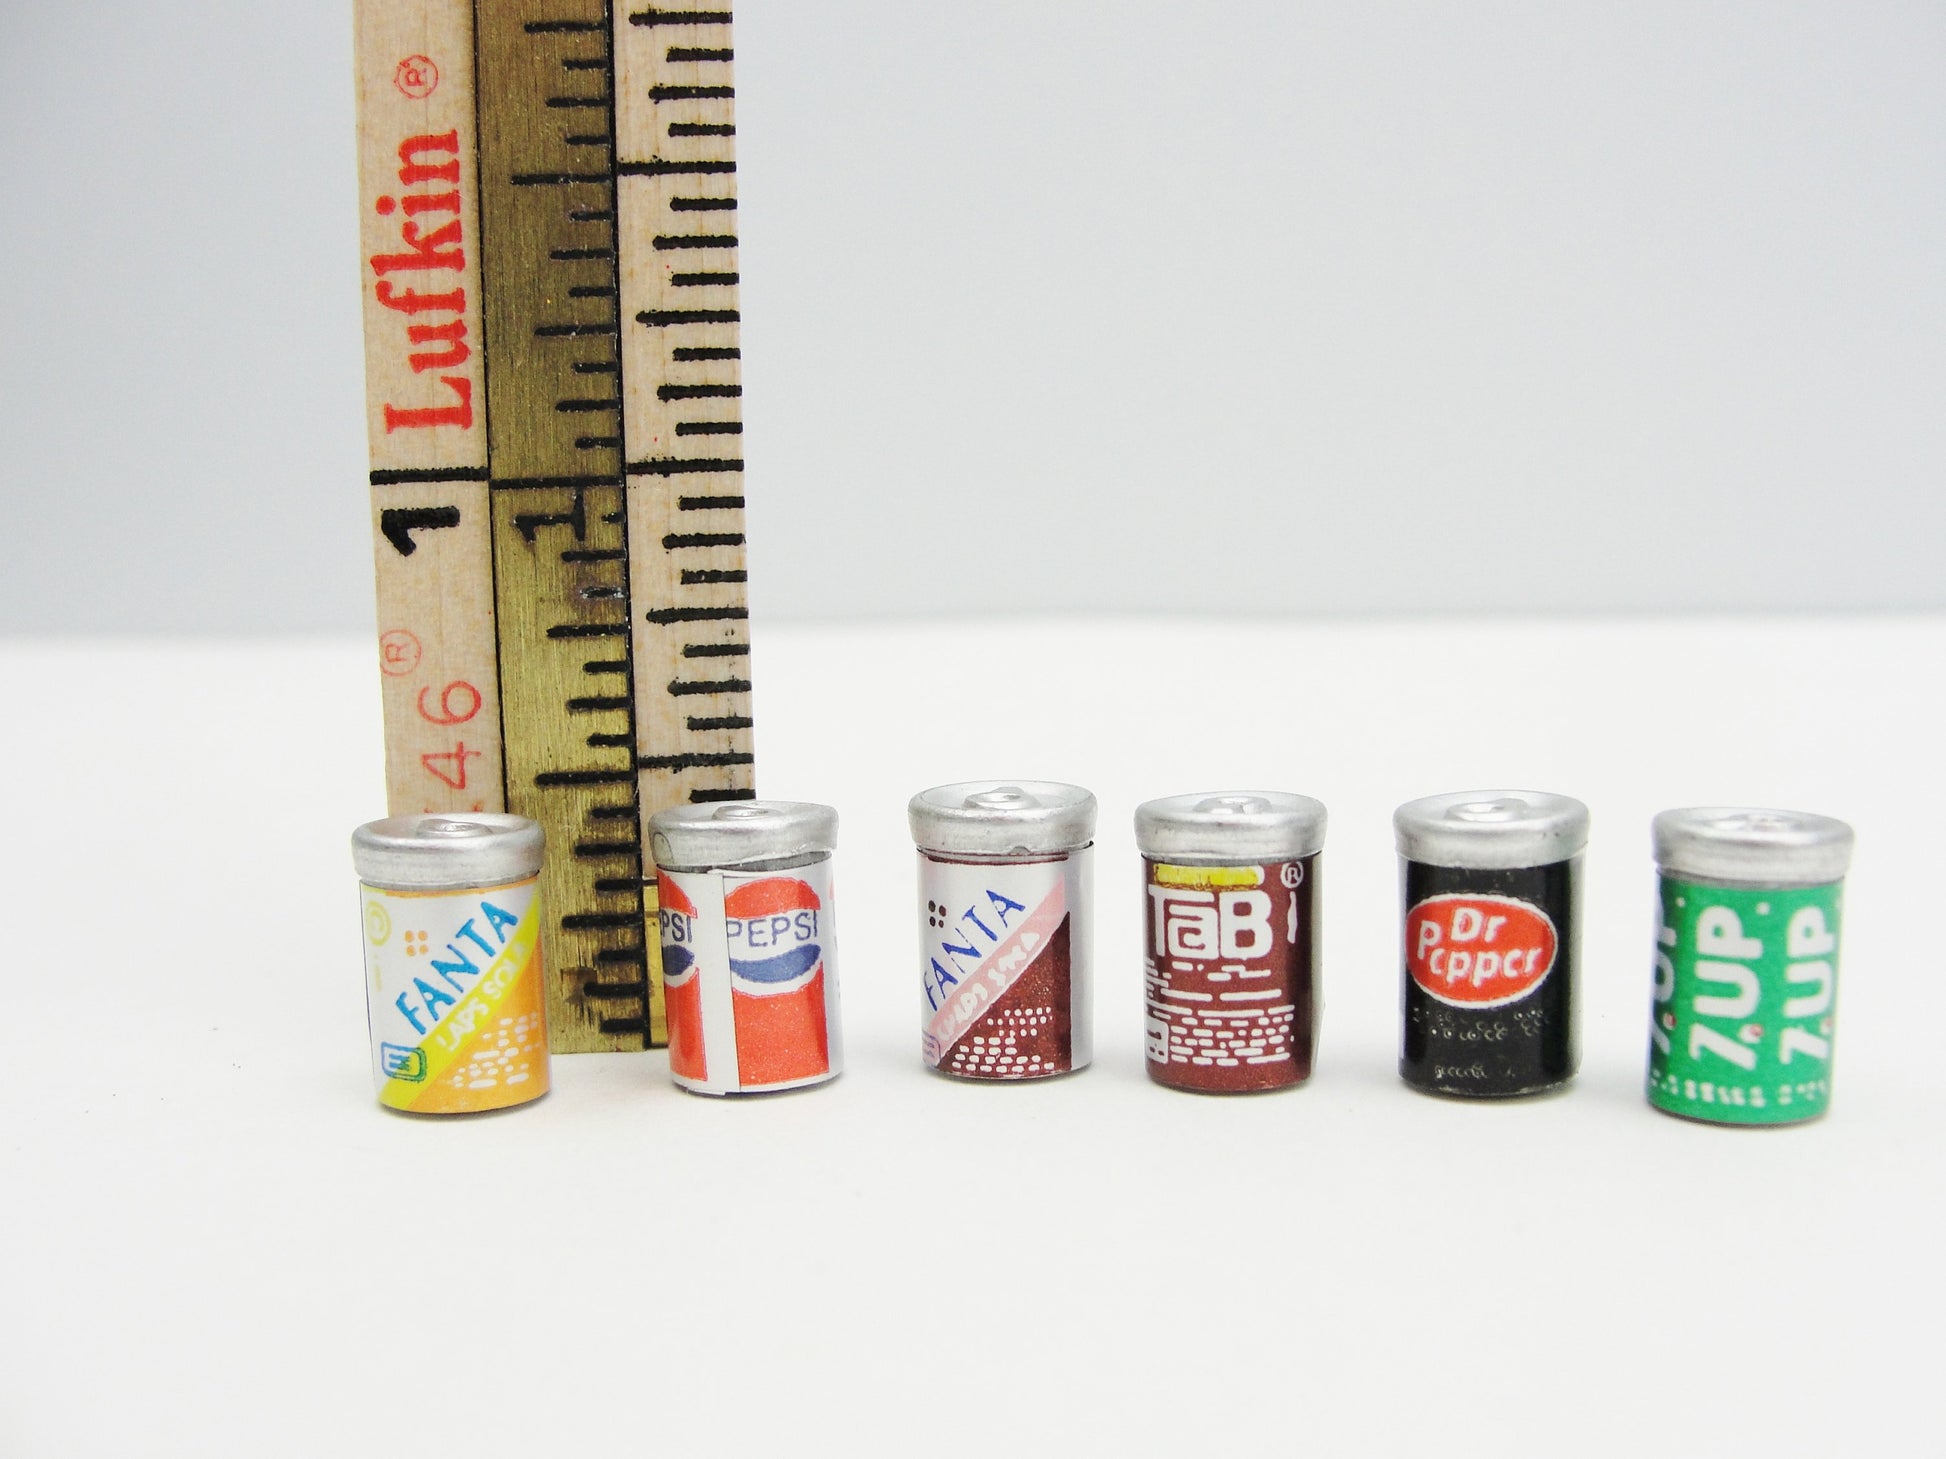 Dollhouse miniature soda cans set of 6 - Miniatures - Craft Supply House